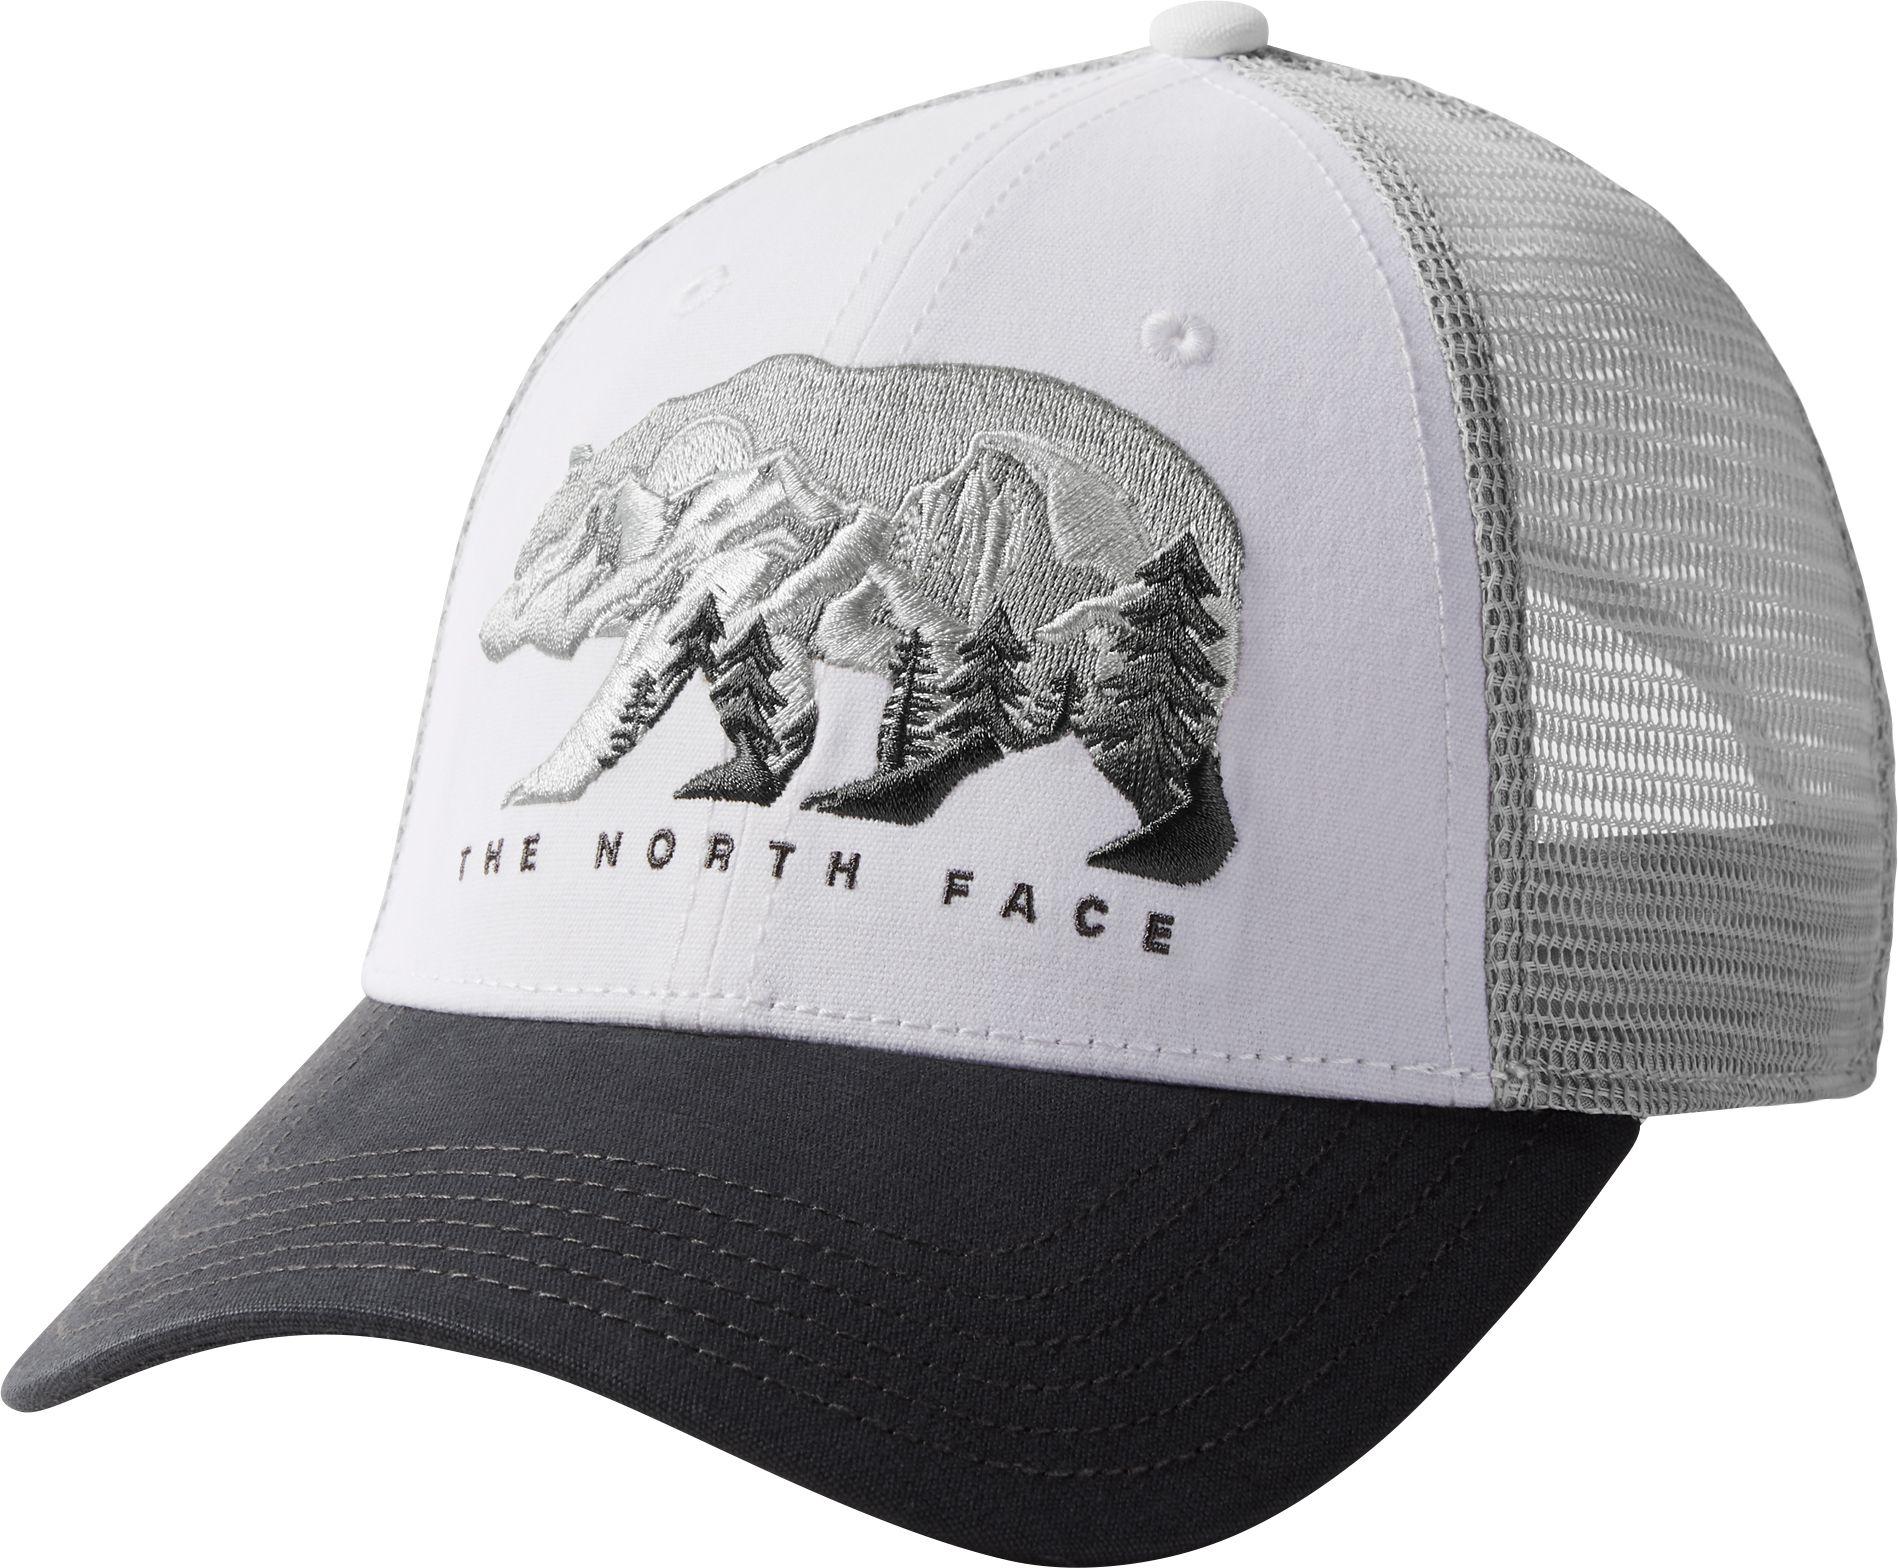 the north face trucker hat Cheaper Than Retail Price> Buy Clothing,  Accessories and lifestyle products for women & men -